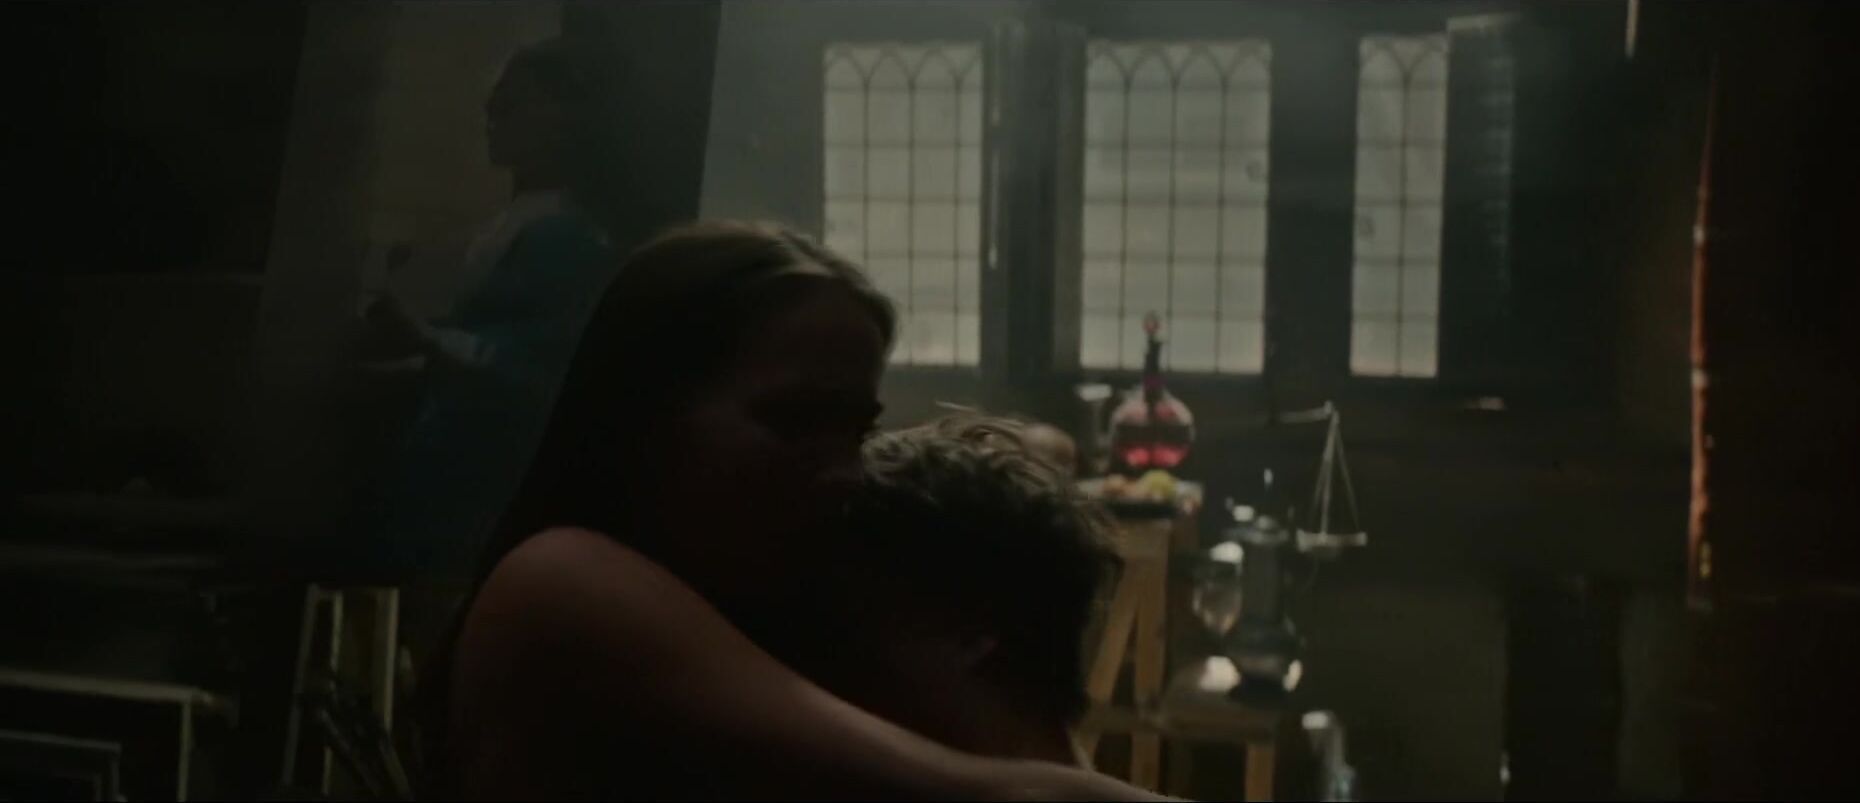 PornoLab Hot sex scenes of Alicia Vikander and other actresses being penetrated in Tulip Fever Facial Cumshot - 1